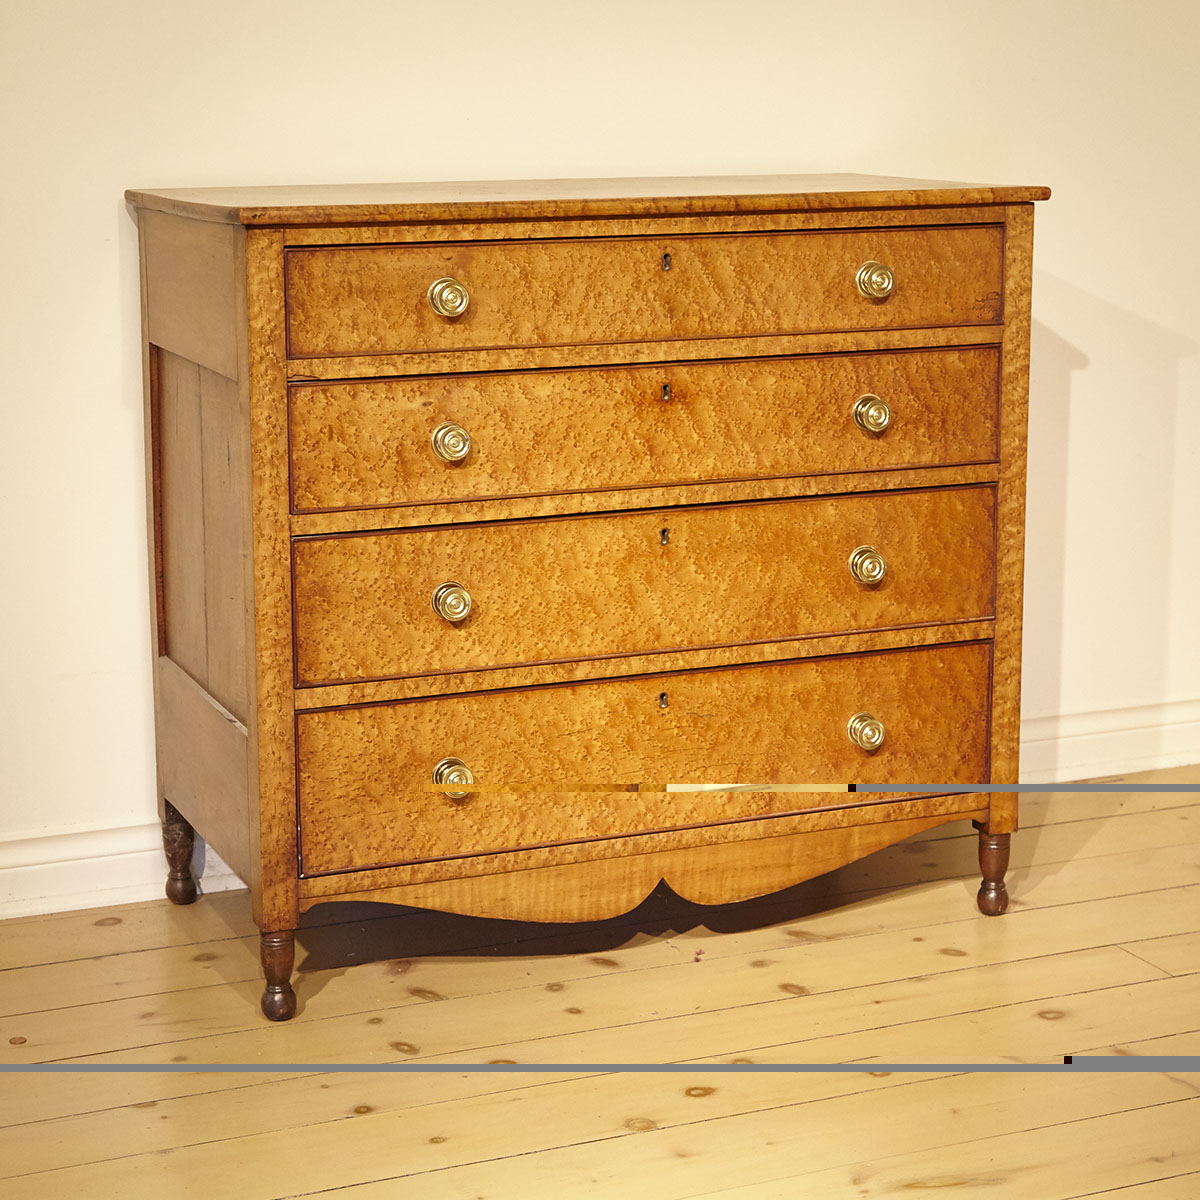 American Birds Eye Maple Chest of Drawers, mid 19th century